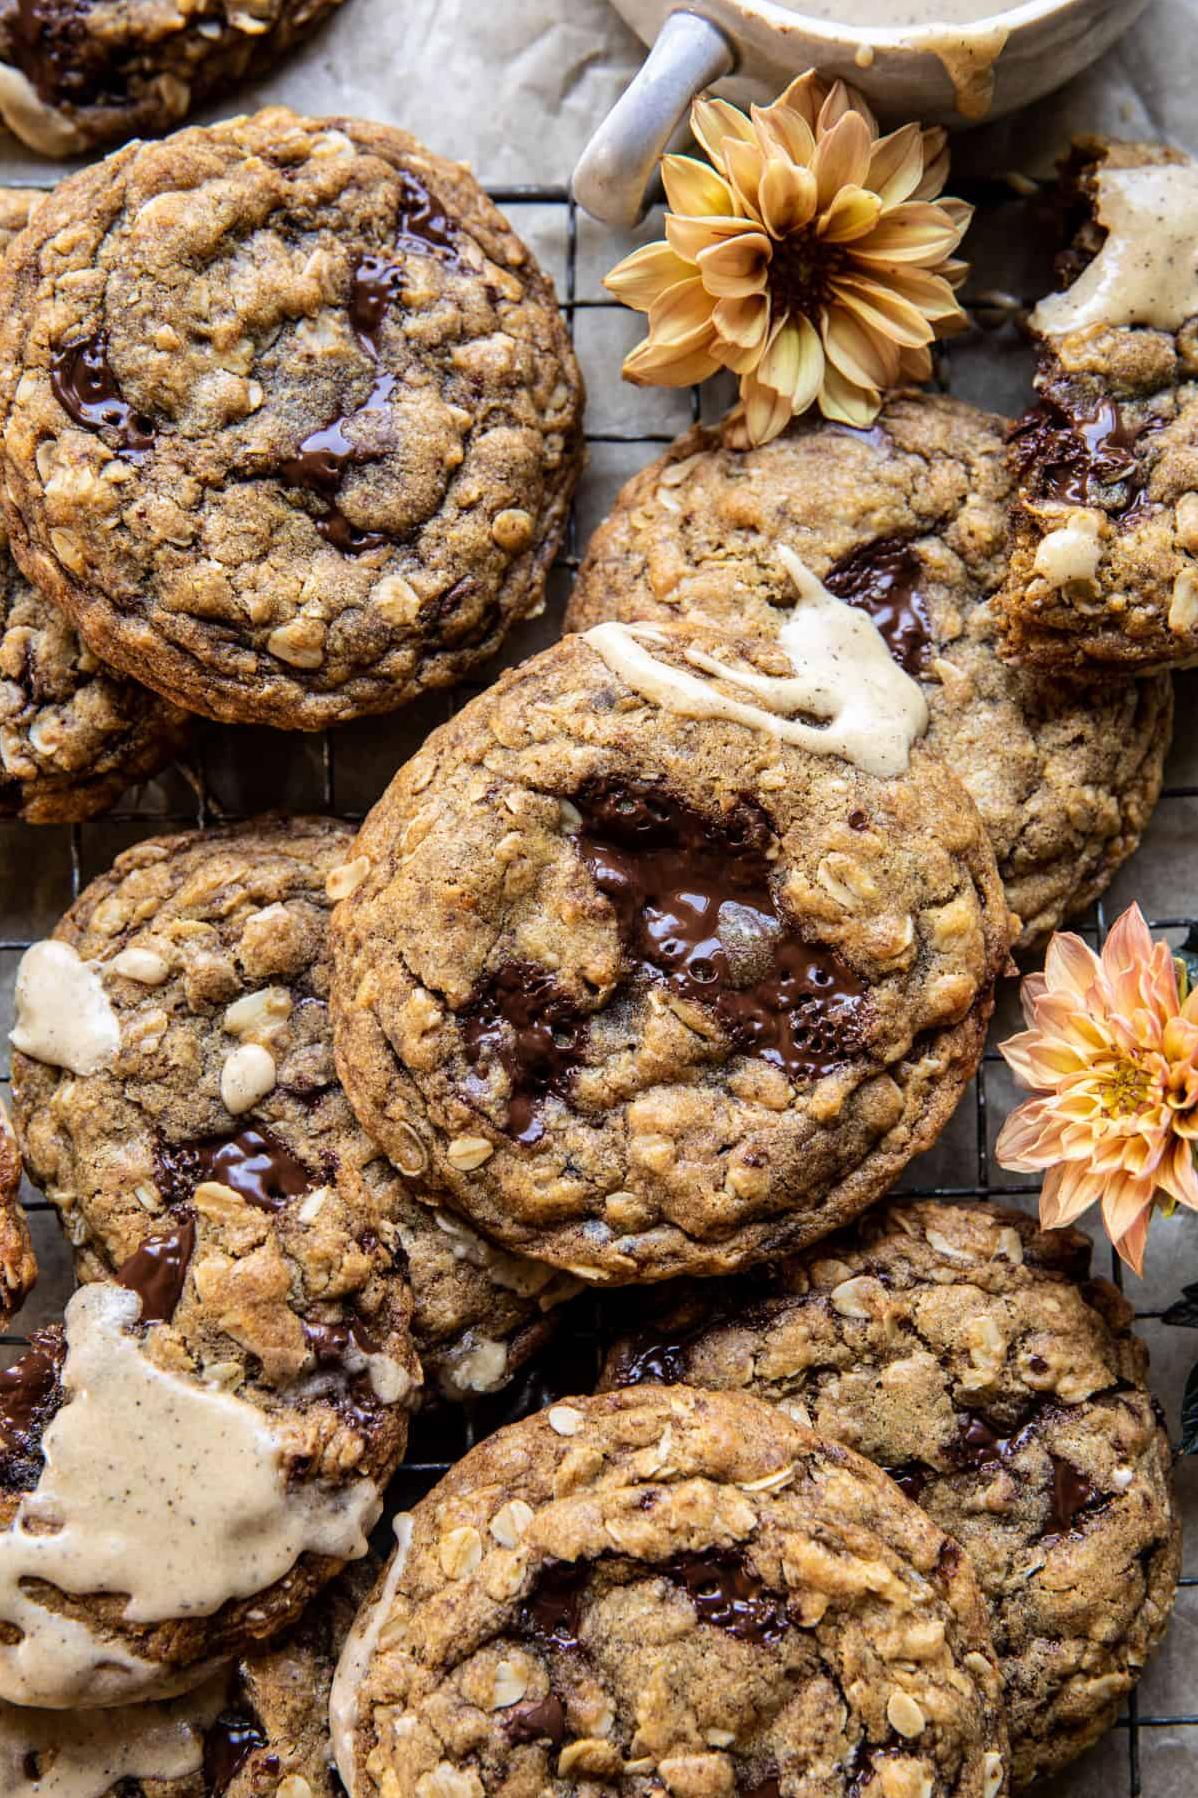  Indulge your sweet tooth with these delectable chocolate chip-espresso cookies!